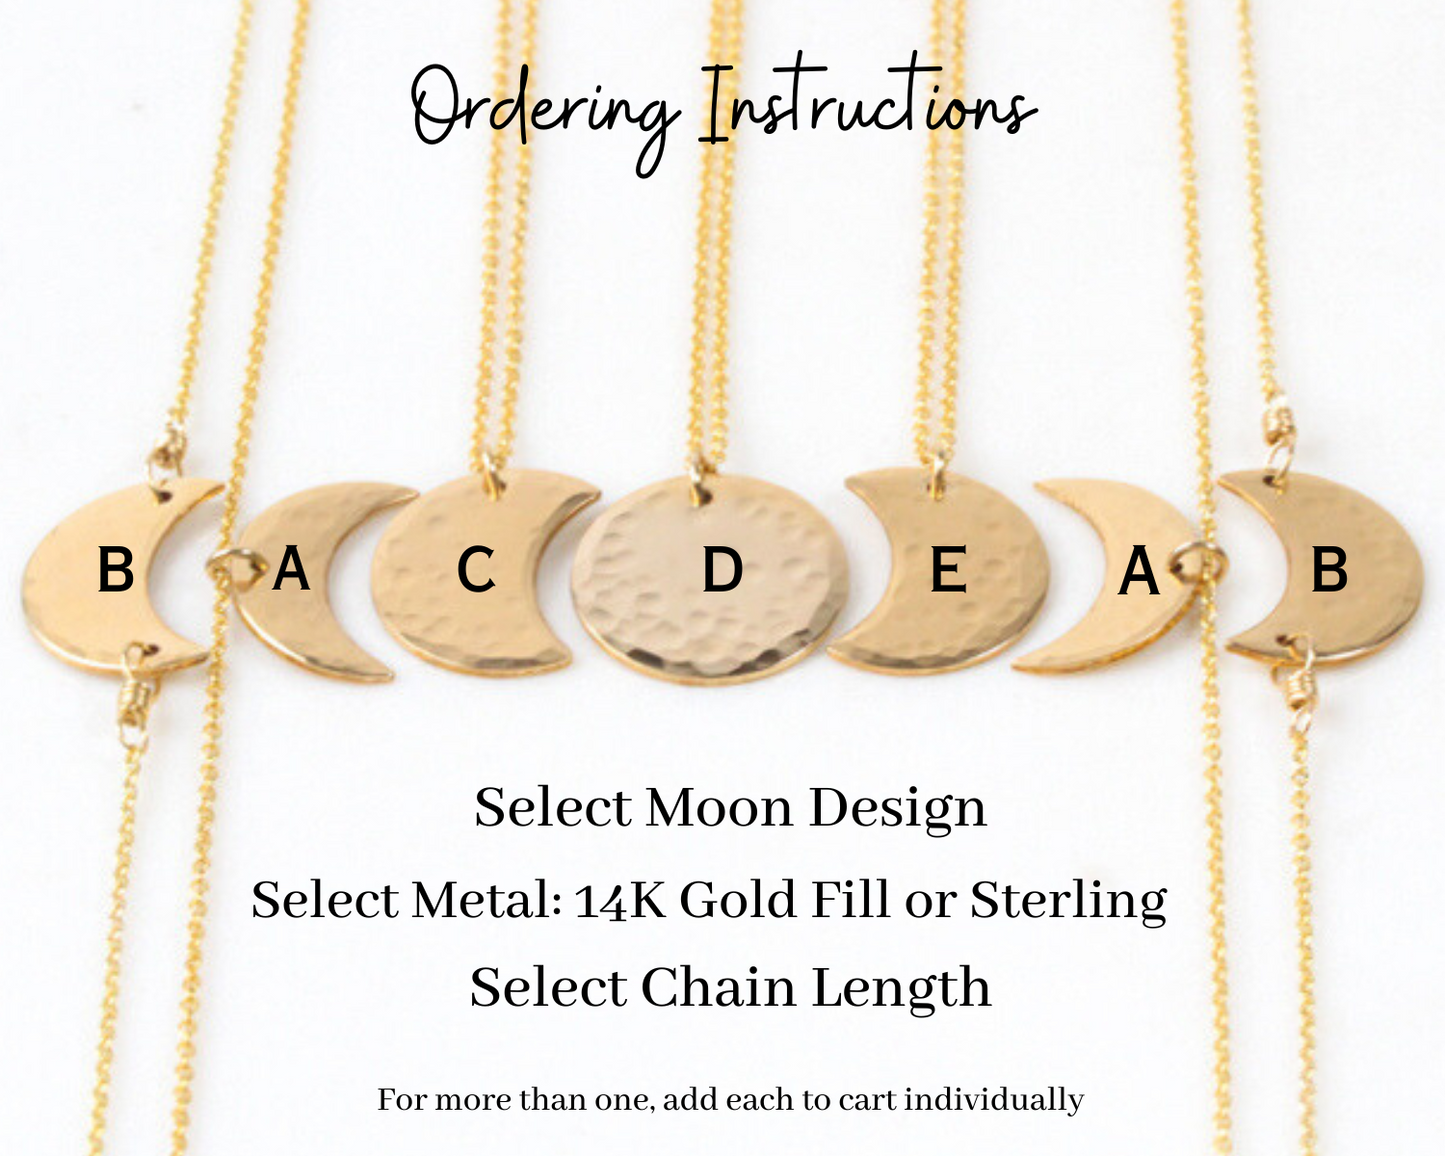 Images shows all seven styles offered in the series. Representing the phases of the moon, these make excellent bridesmaid and wedding party gifts. Offered in sterling silver or yellow gold, you select the moon design, the metal and the chain length.